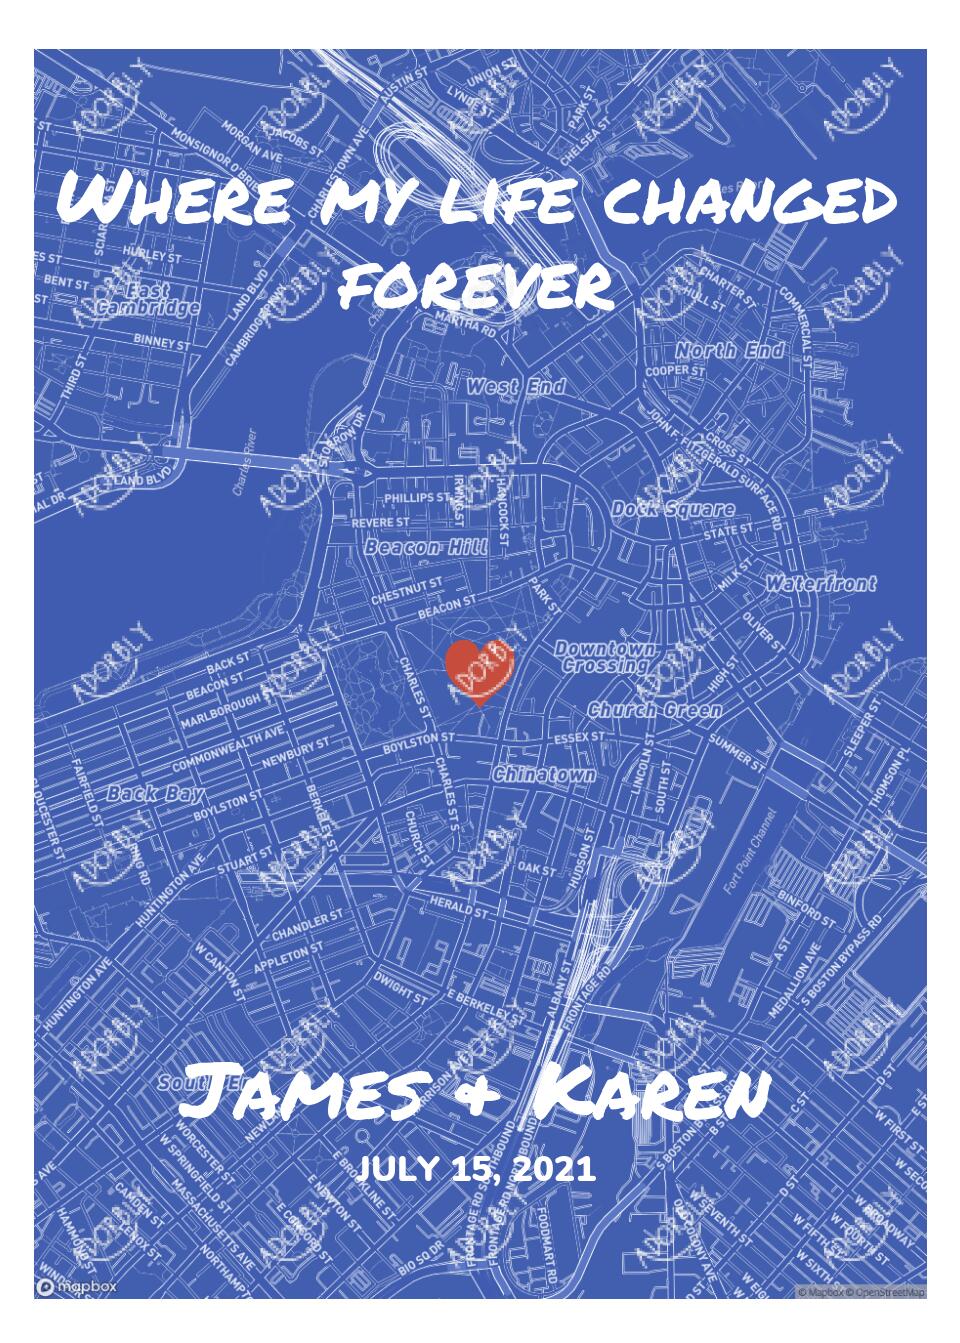 Where My Life Changed Blueprint Map - For All Couples - Personalized Anniversary Card